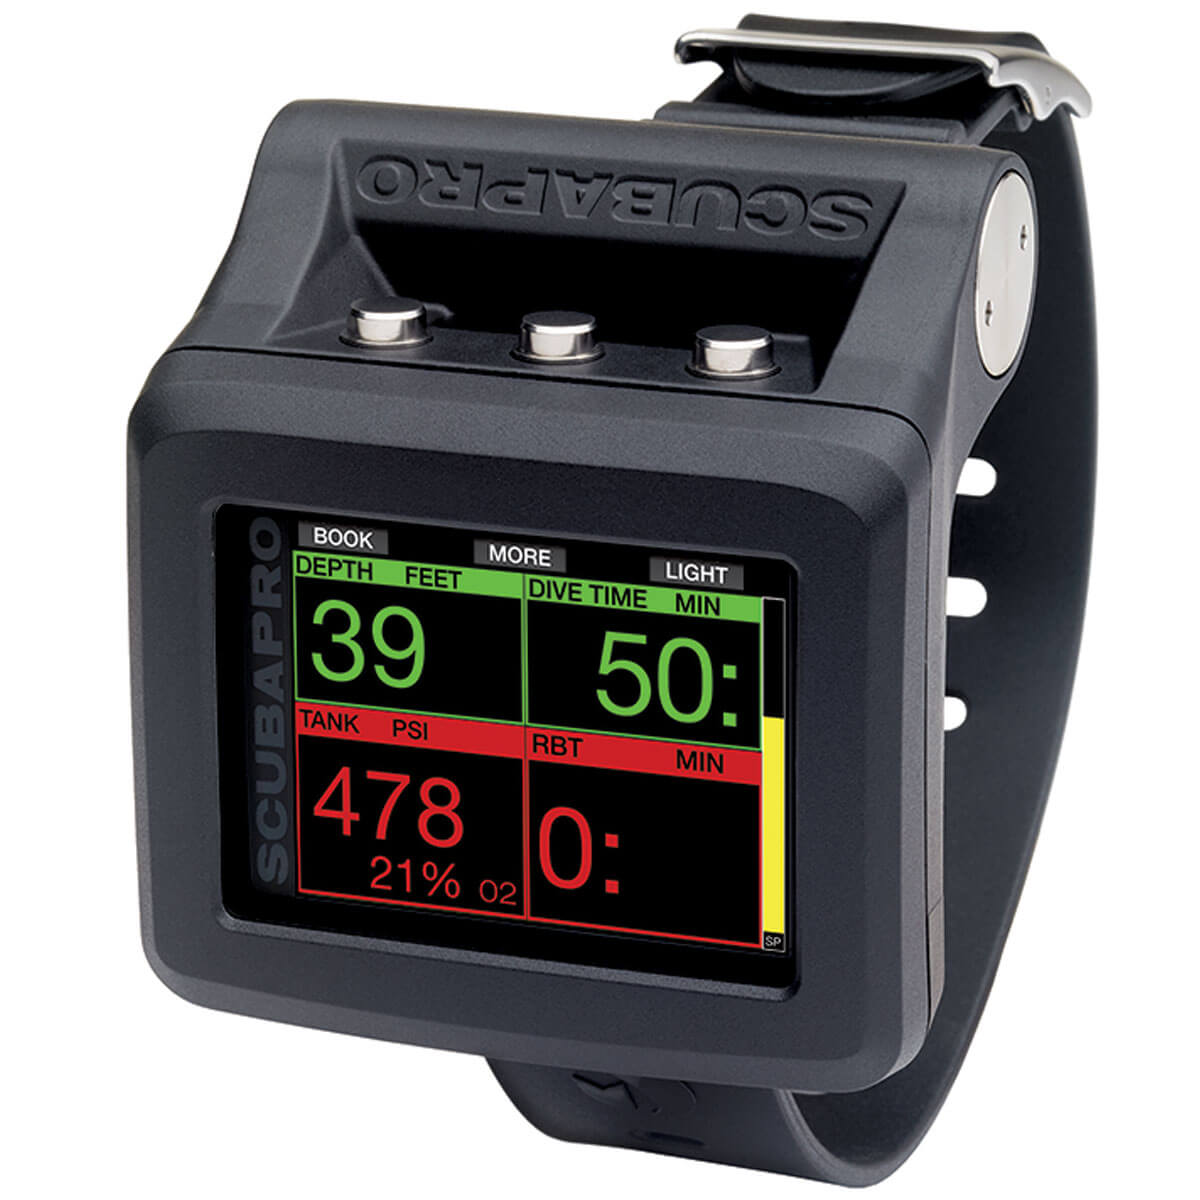 G2 Wrist Computer With transmitter and HR Monitor